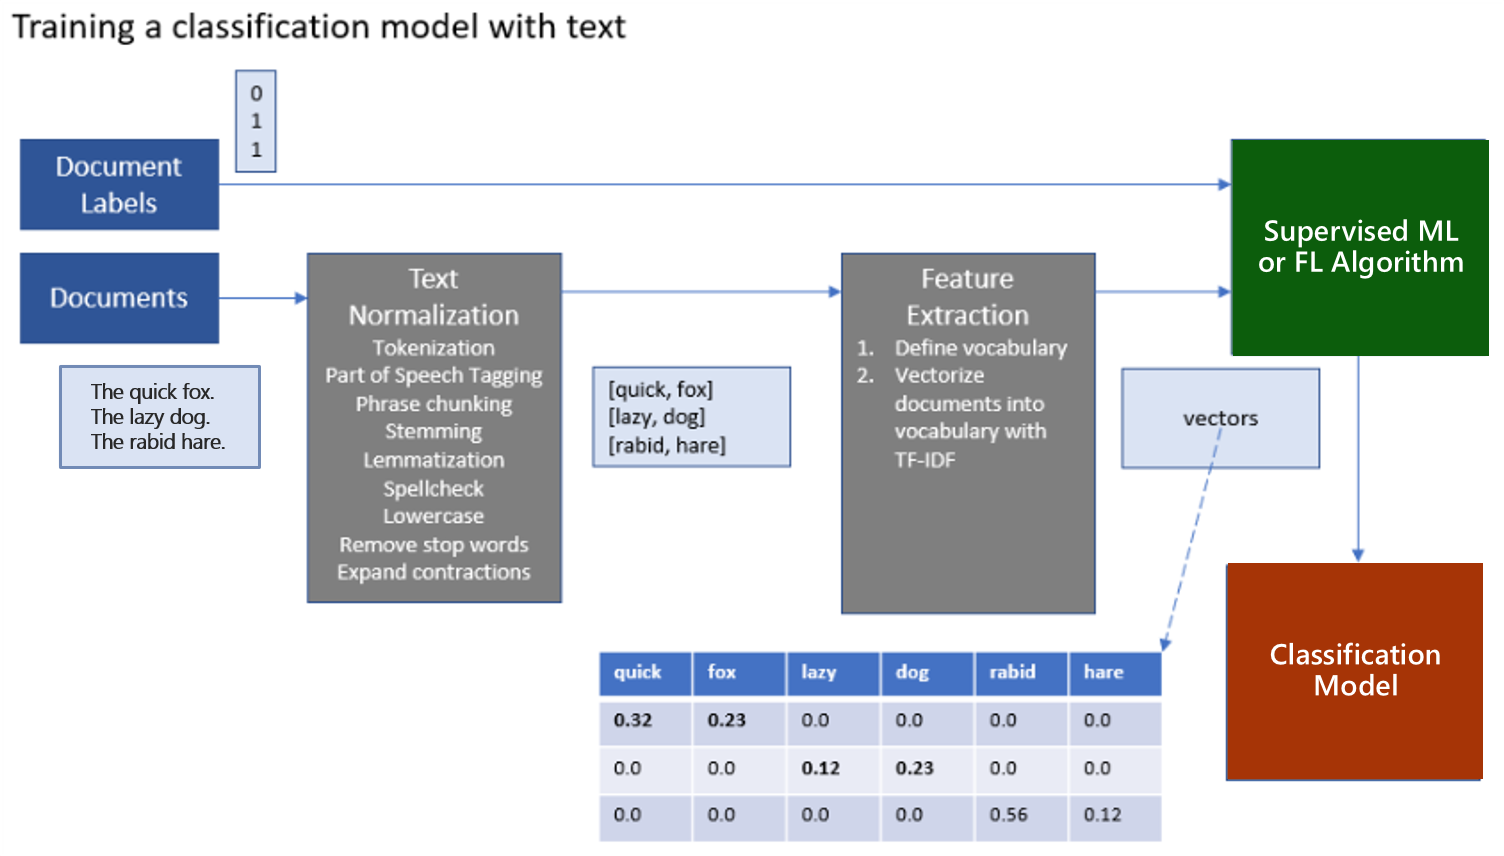 In the Training a classification model with text diagram, Document labels points to Supervised ML or DL Algorithm, which points to Classification Model. Documents points to Text Normalization, which points to Feature Extraction, which points to Supervised ML or DL Algorithm. Vectors points to a table of words and percentages.